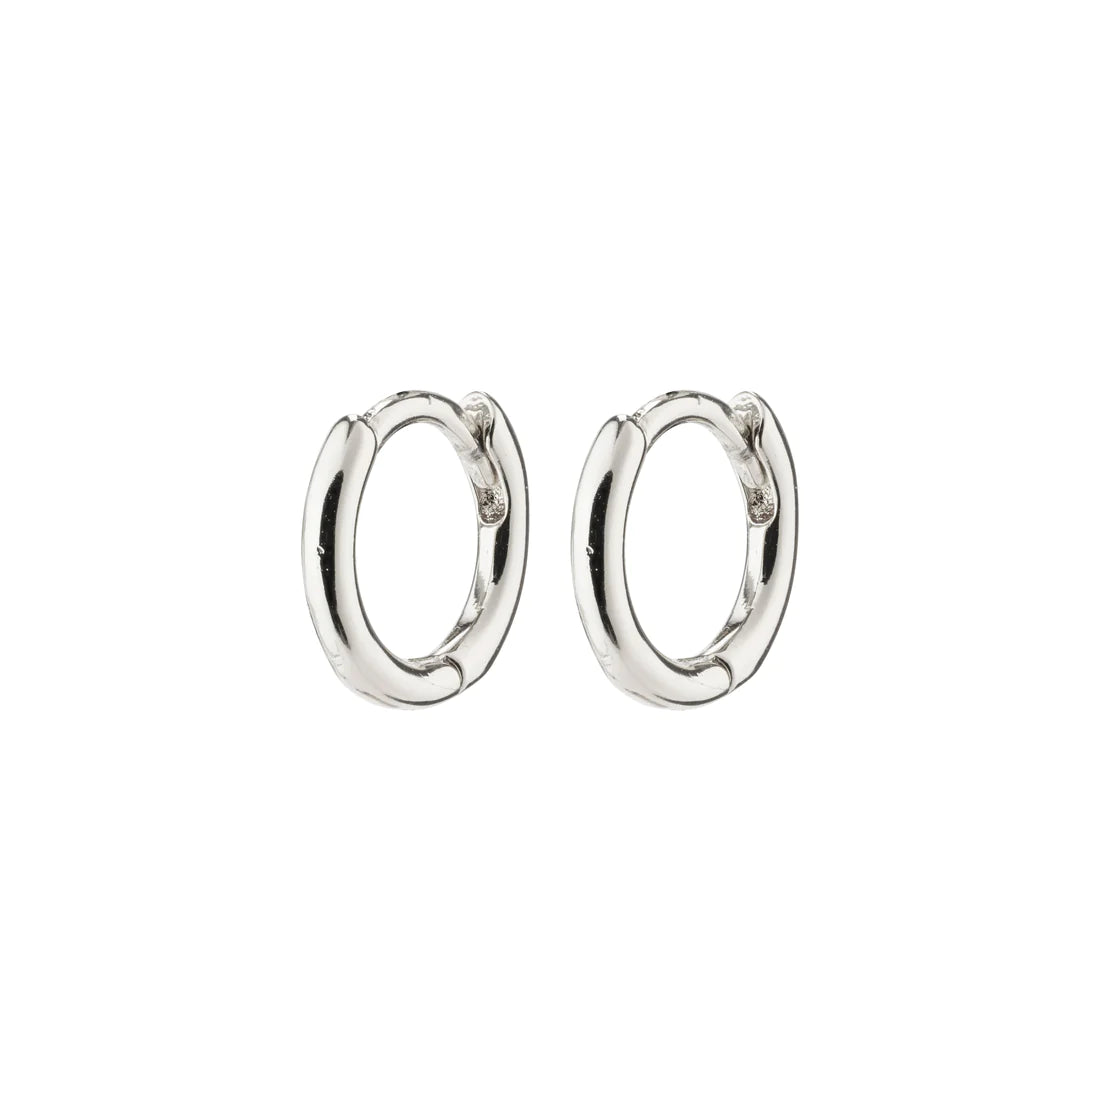 Eanna, recycled huggie hoops, silver-plated